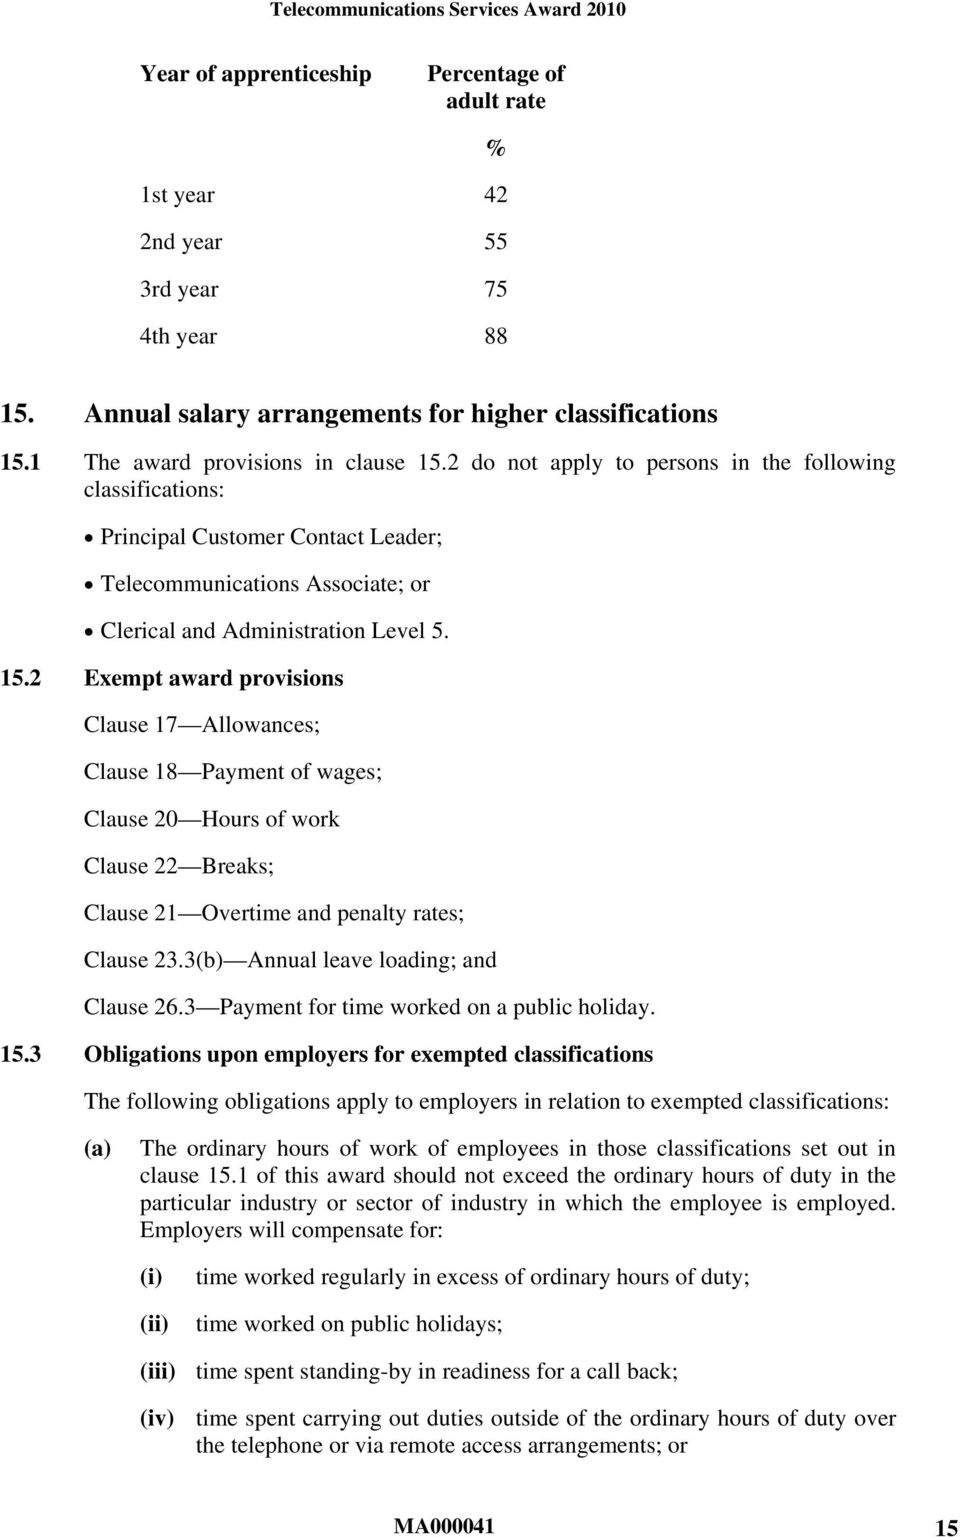 2 Exempt award provisions Clause 17 Allowances; Clause 18 Payment of wages; Clause 20 Hours of work Clause 22 Breaks; Clause 21 Overtime and penalty rates; Clause 23.